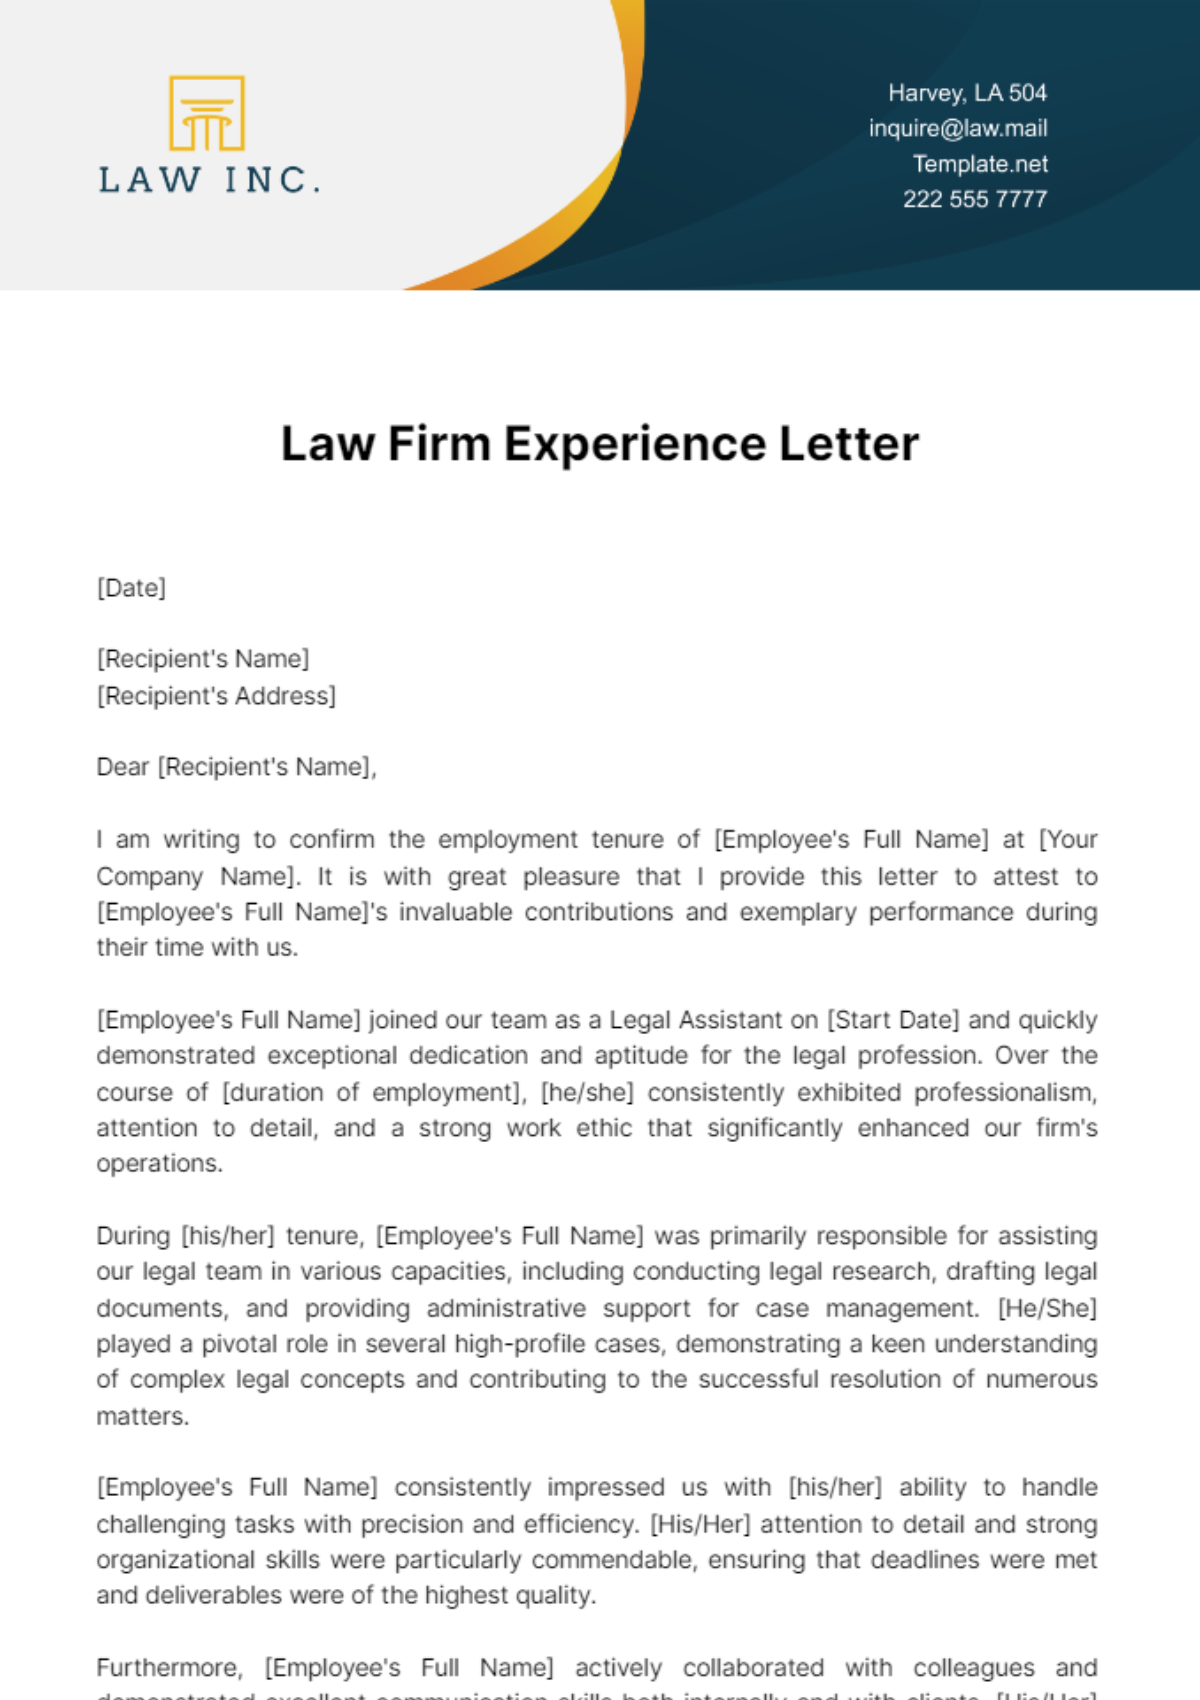 Free Law Firm Experience Letter Template